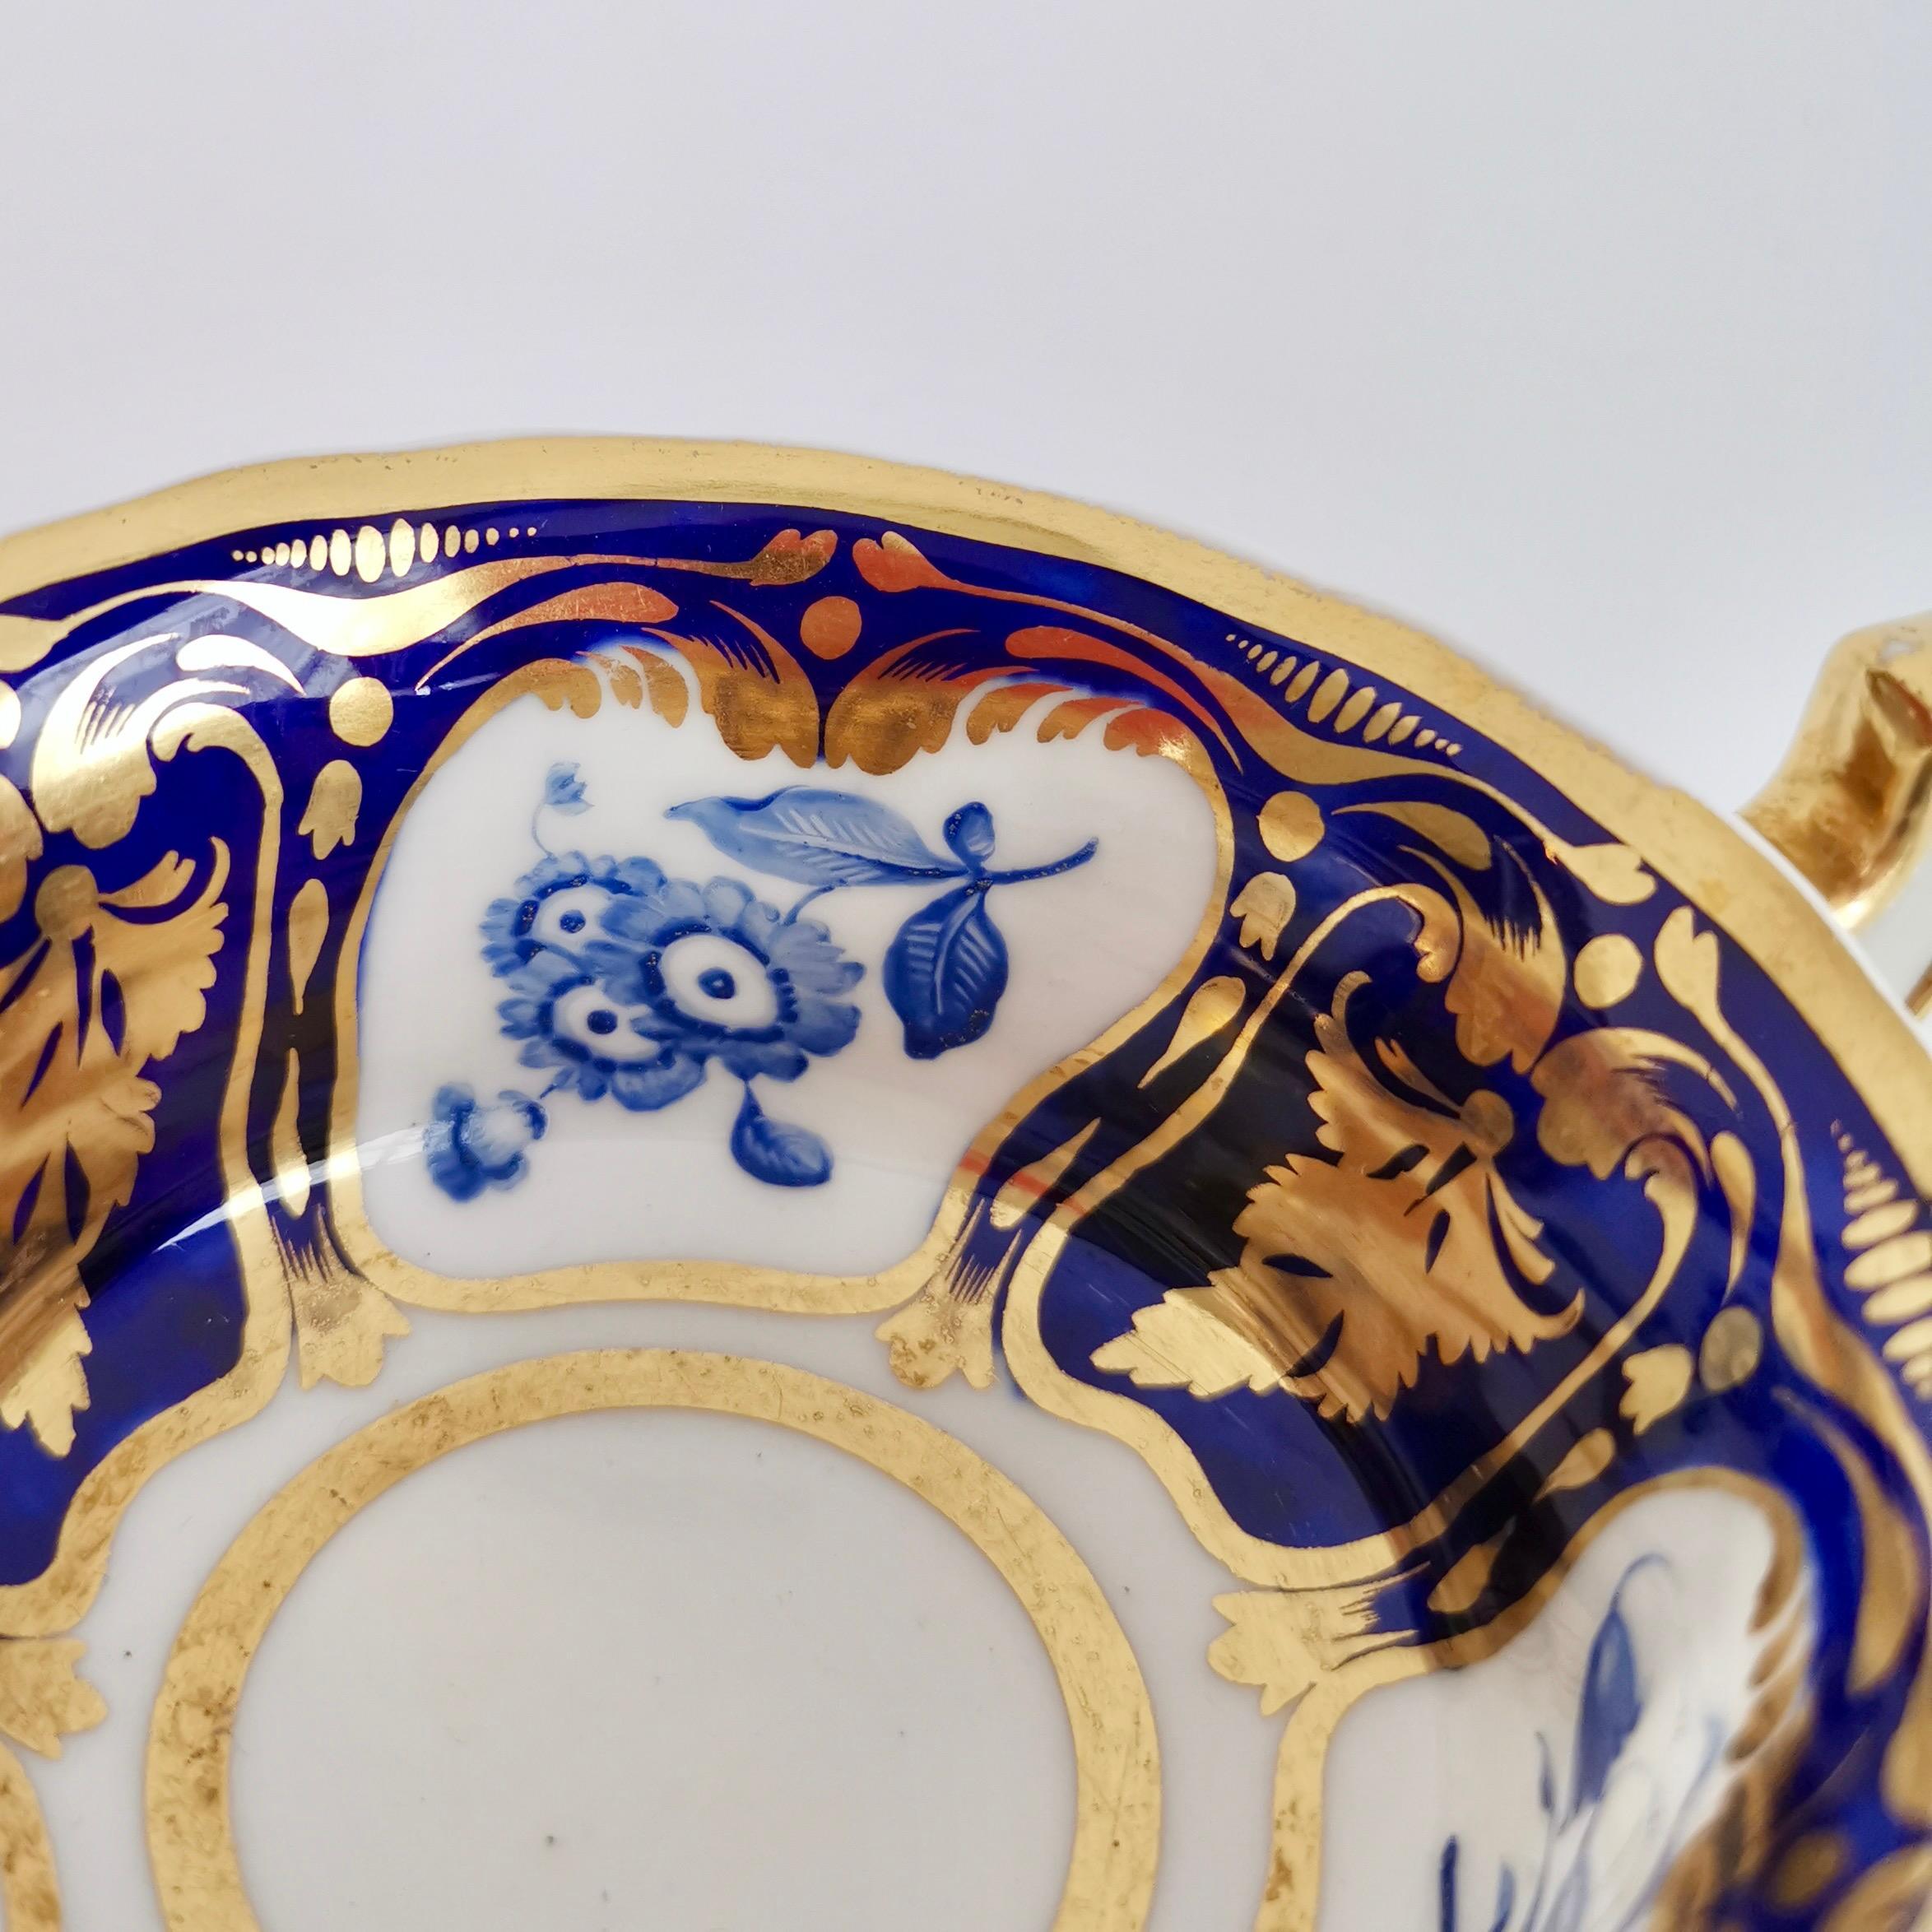 Ridgway Porcelain Teacup and Saucer, Blue Flowers and Gilt, Regency, Ca 1825 For Sale 1